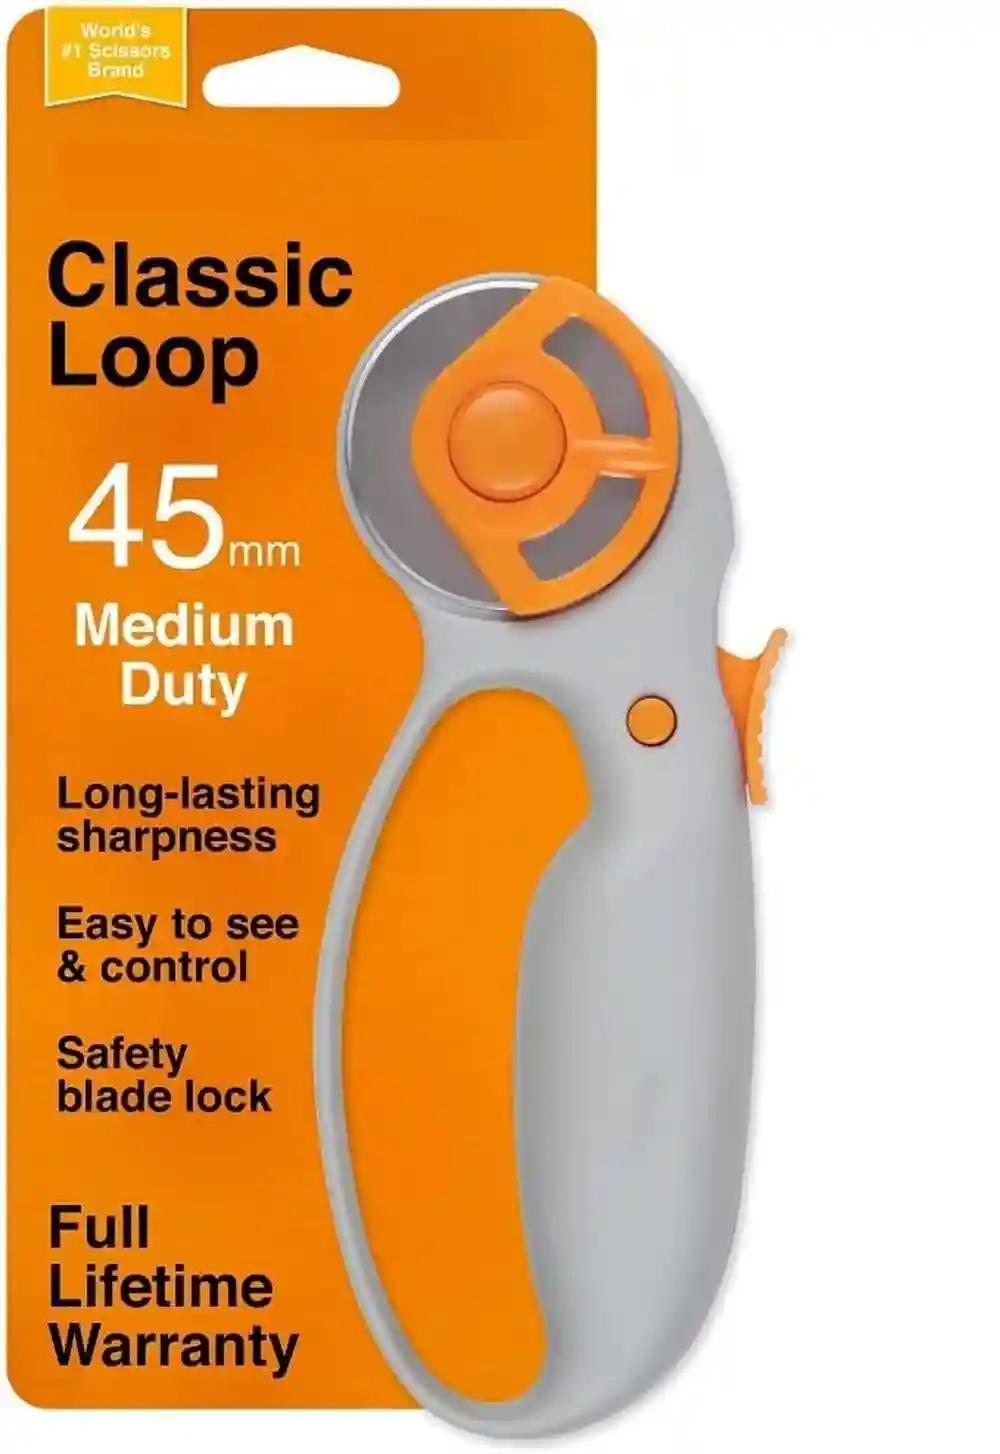 45Mm Classic Loop Rotary Cutter Squeeze Handle With Safety Lock Comfort Rotary Cutter Ergonomic Design Fabric Handle Loop Cutter Precise Cutting Ideal For Sewing Fabric Leather Quilting (1Pcs)